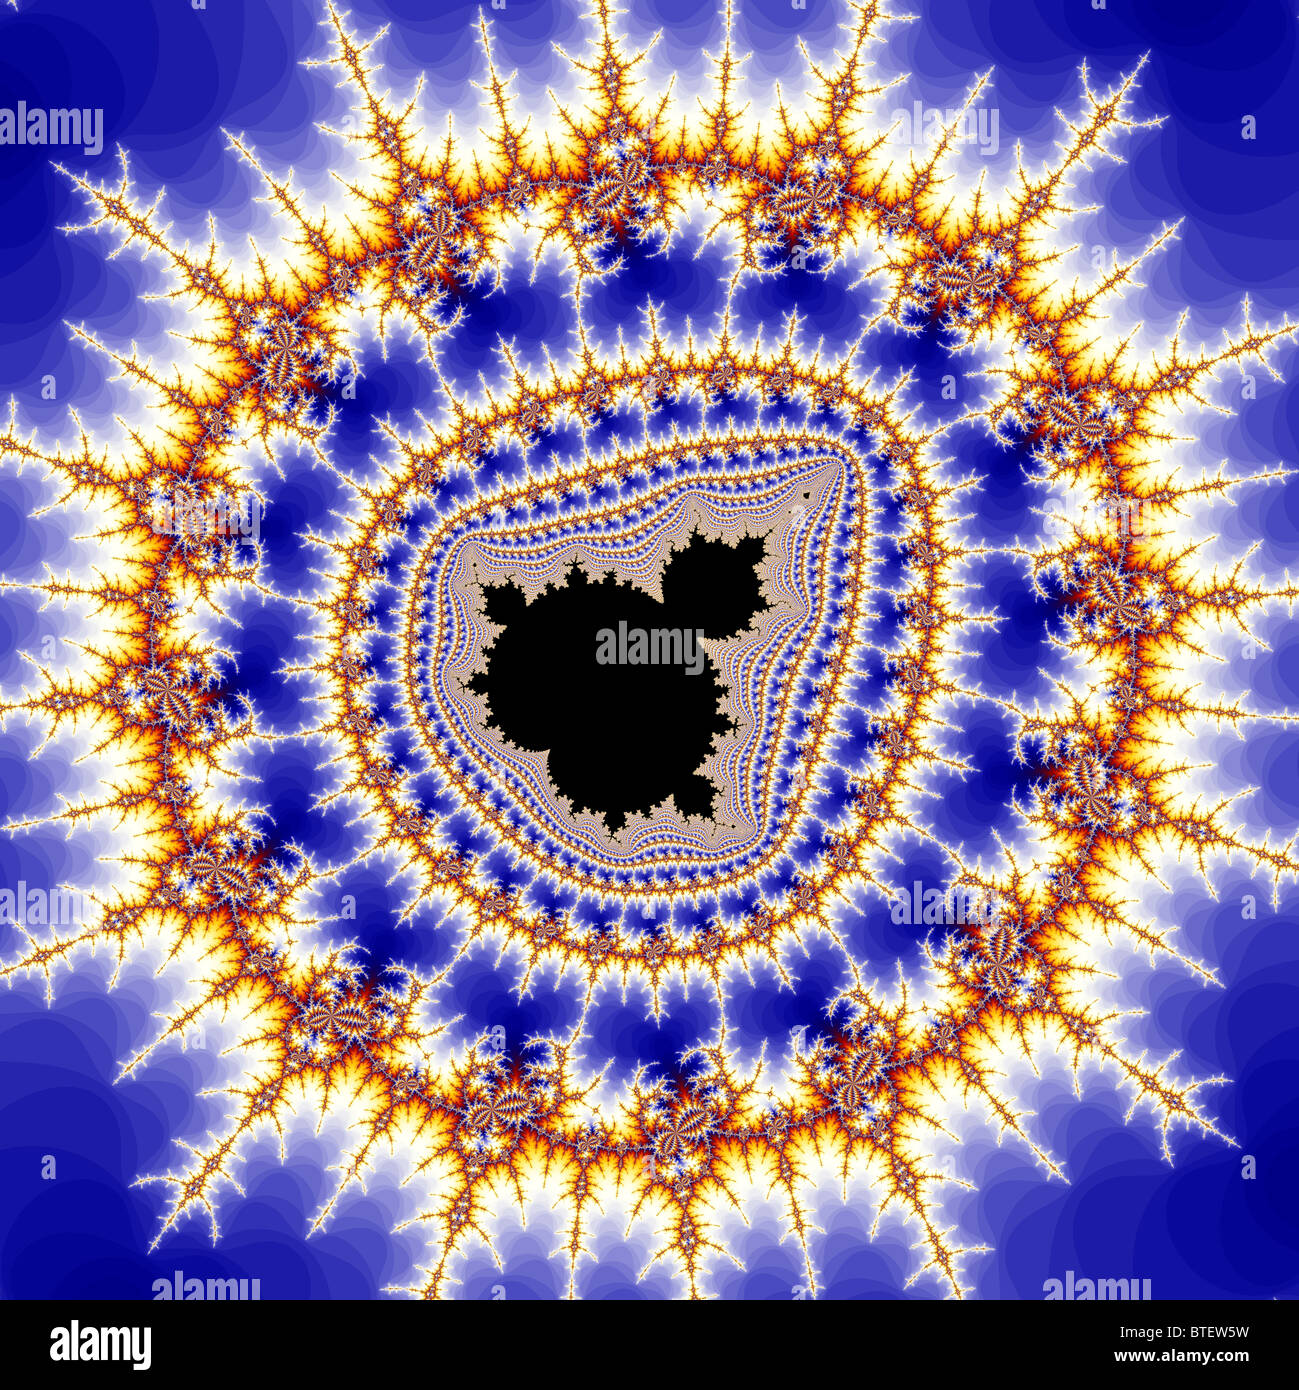 Zoom Into The Mandelbrot Set High Resolution Stock Photography and ...